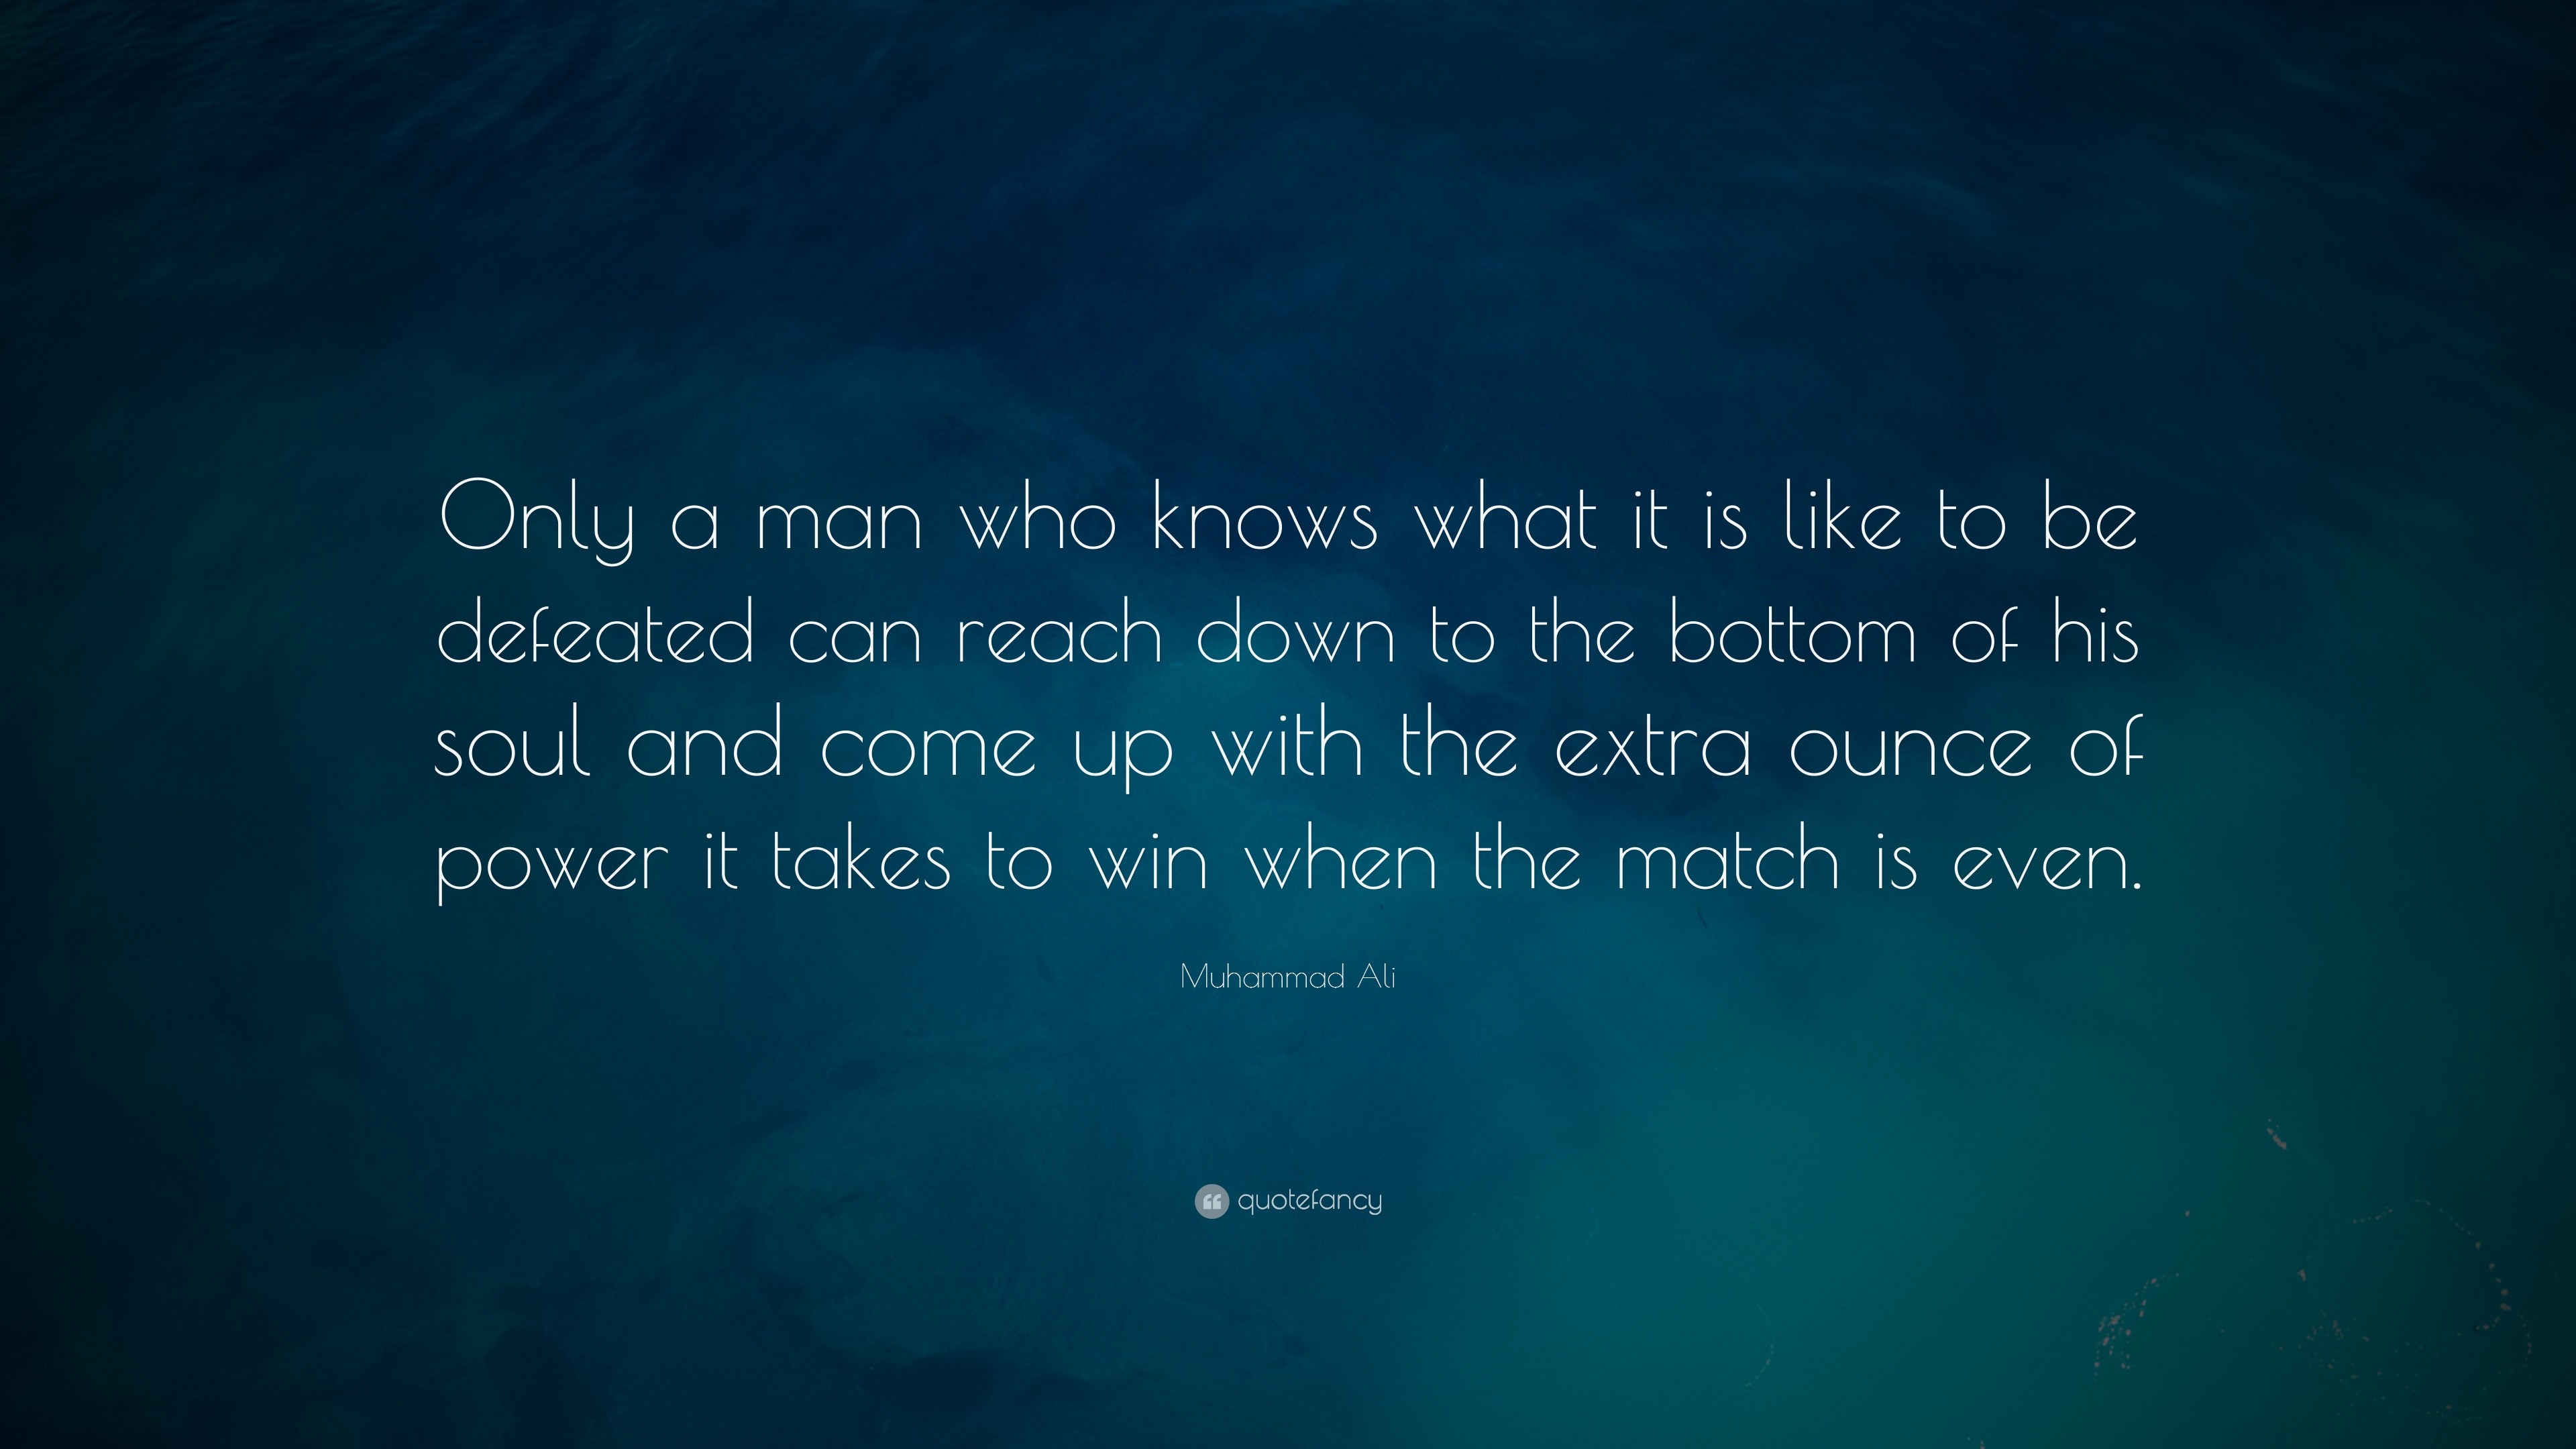 3840x2160 Muhammad Ali Quote: “Only a man who knows what it is like to be